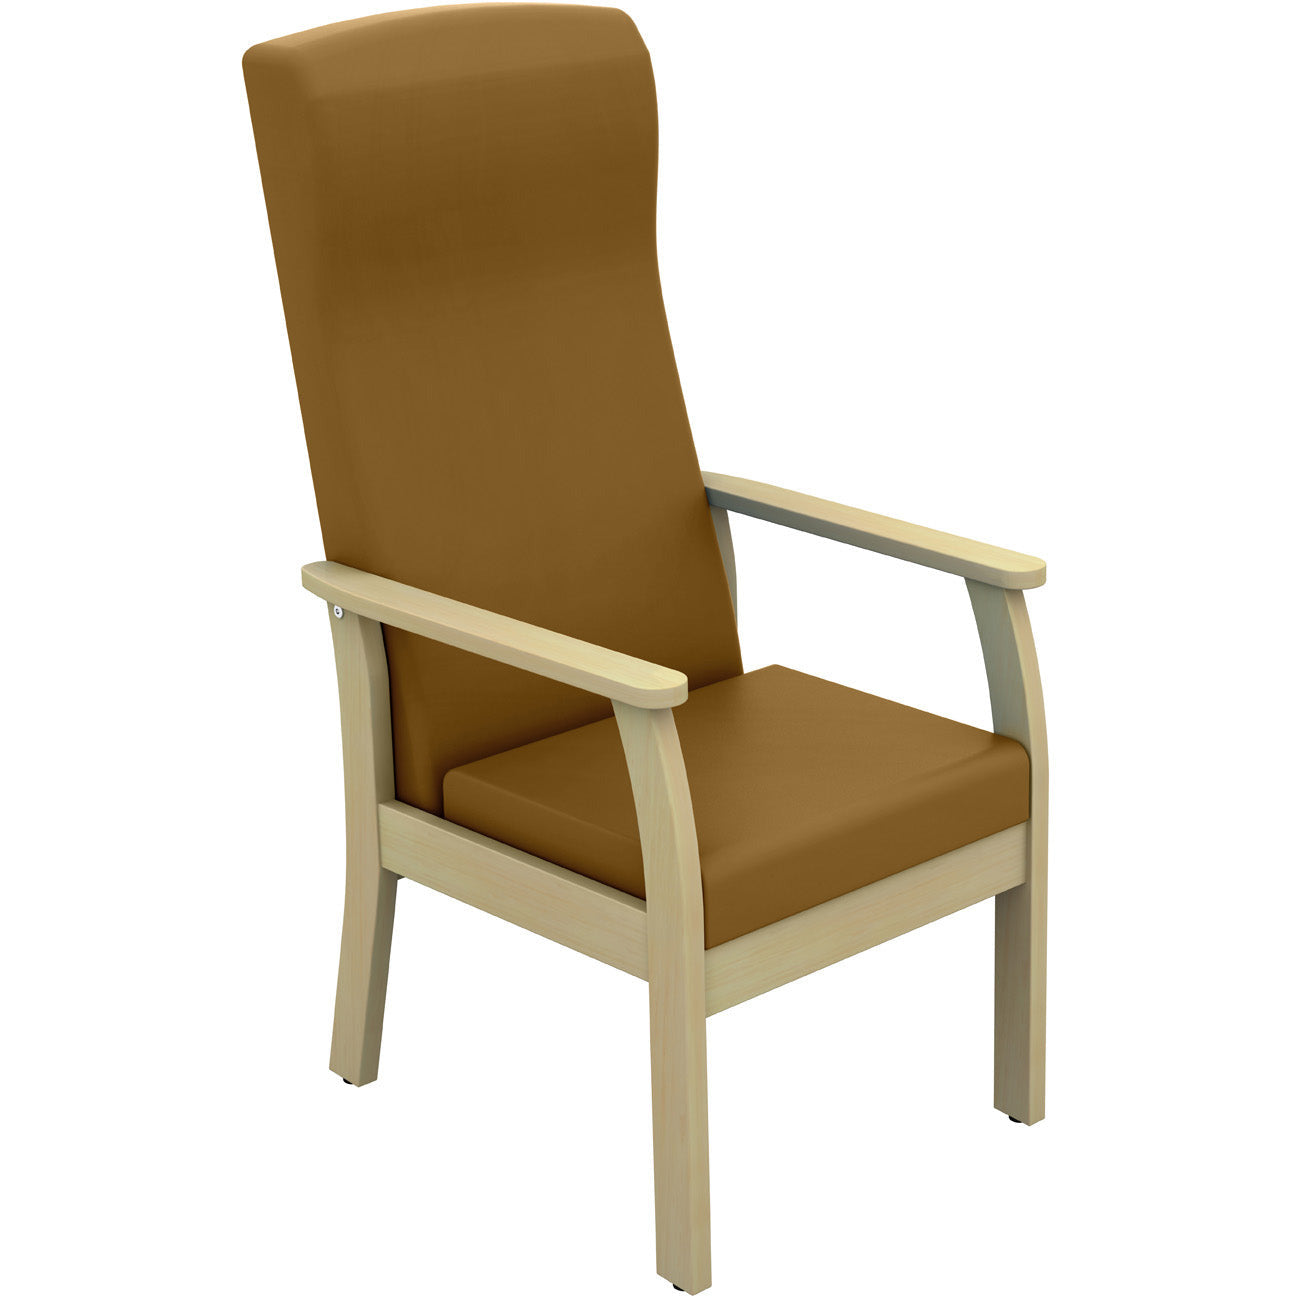 Sunflower Atlas High-Back Arm Chair with Drop Arms - Vinyl Upholstery